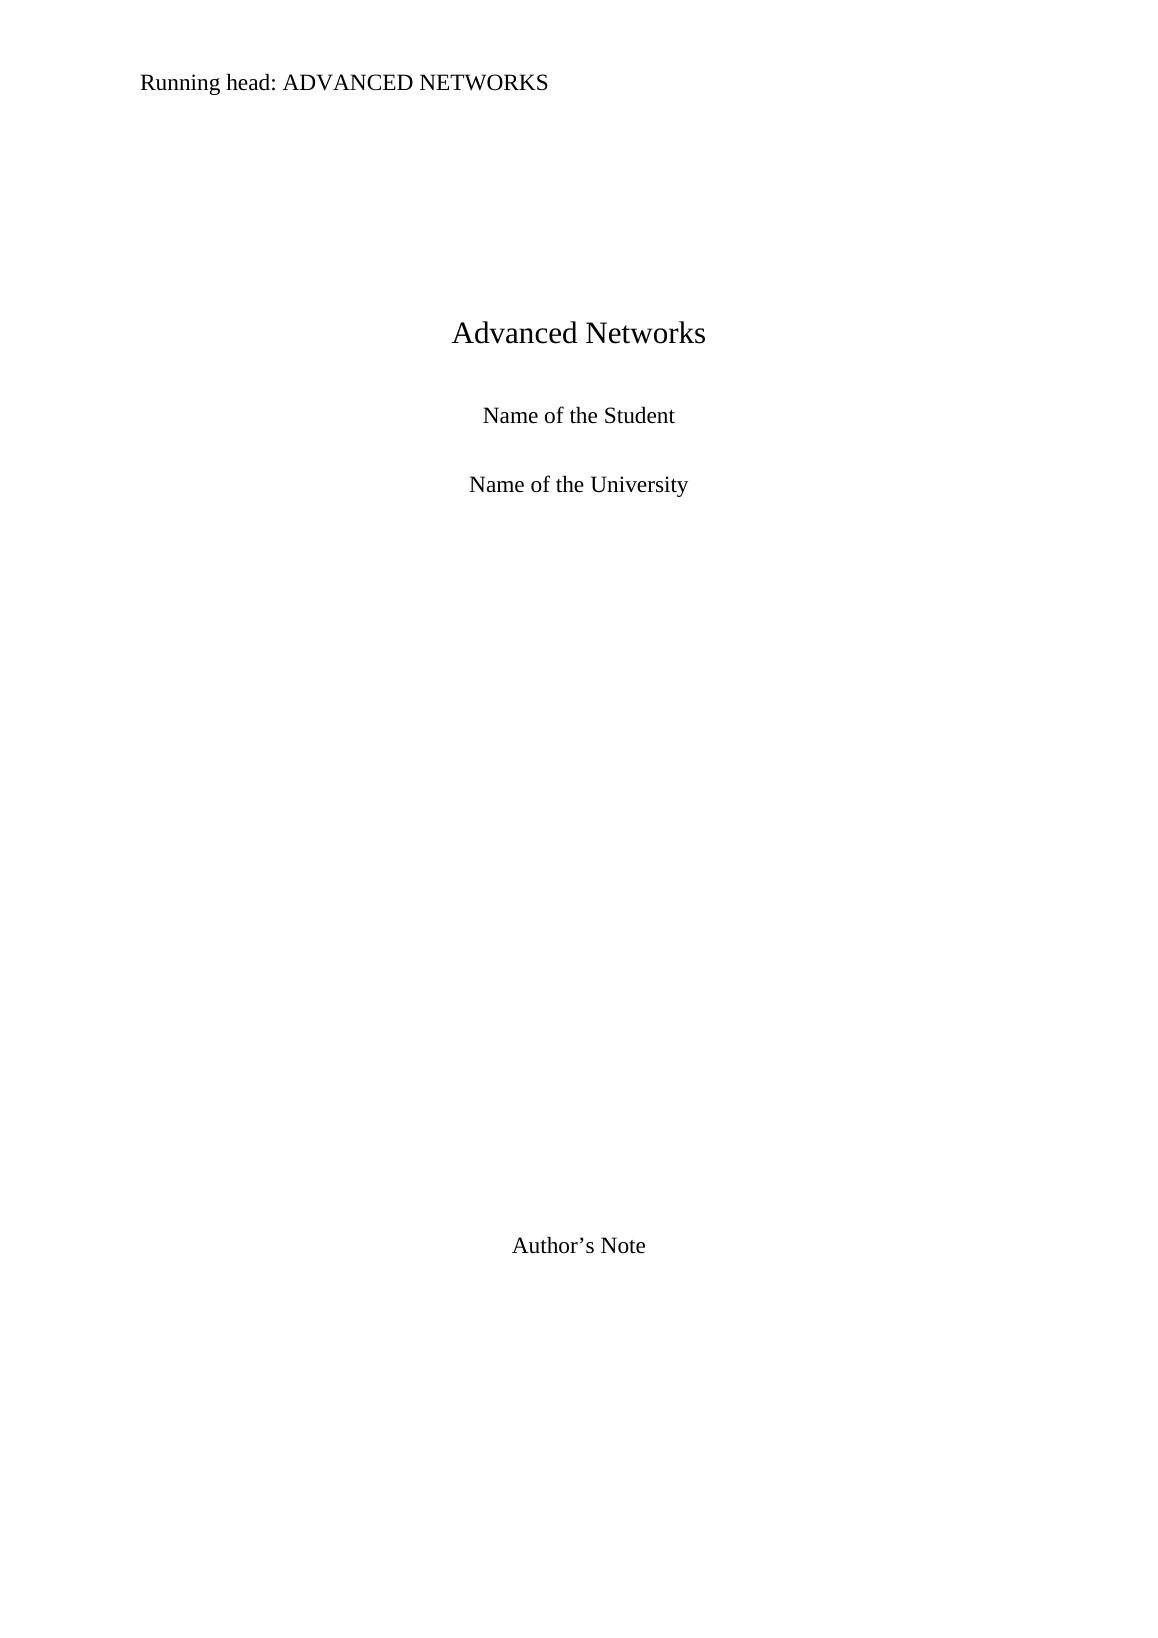 Advanced Networks Assignment Solution_1